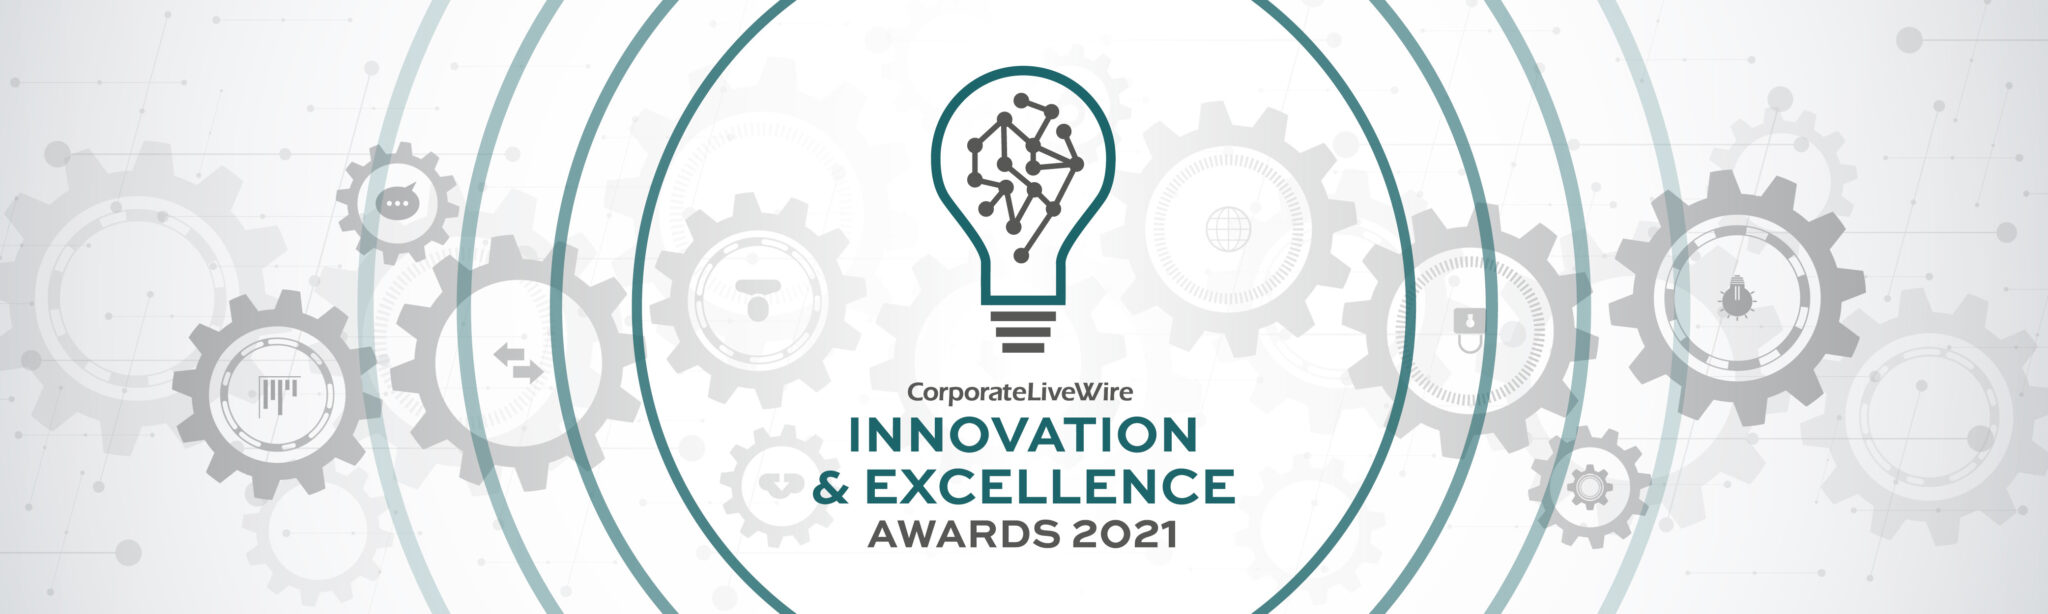 Corporate Livewire Innovation Excellence Awards 2021